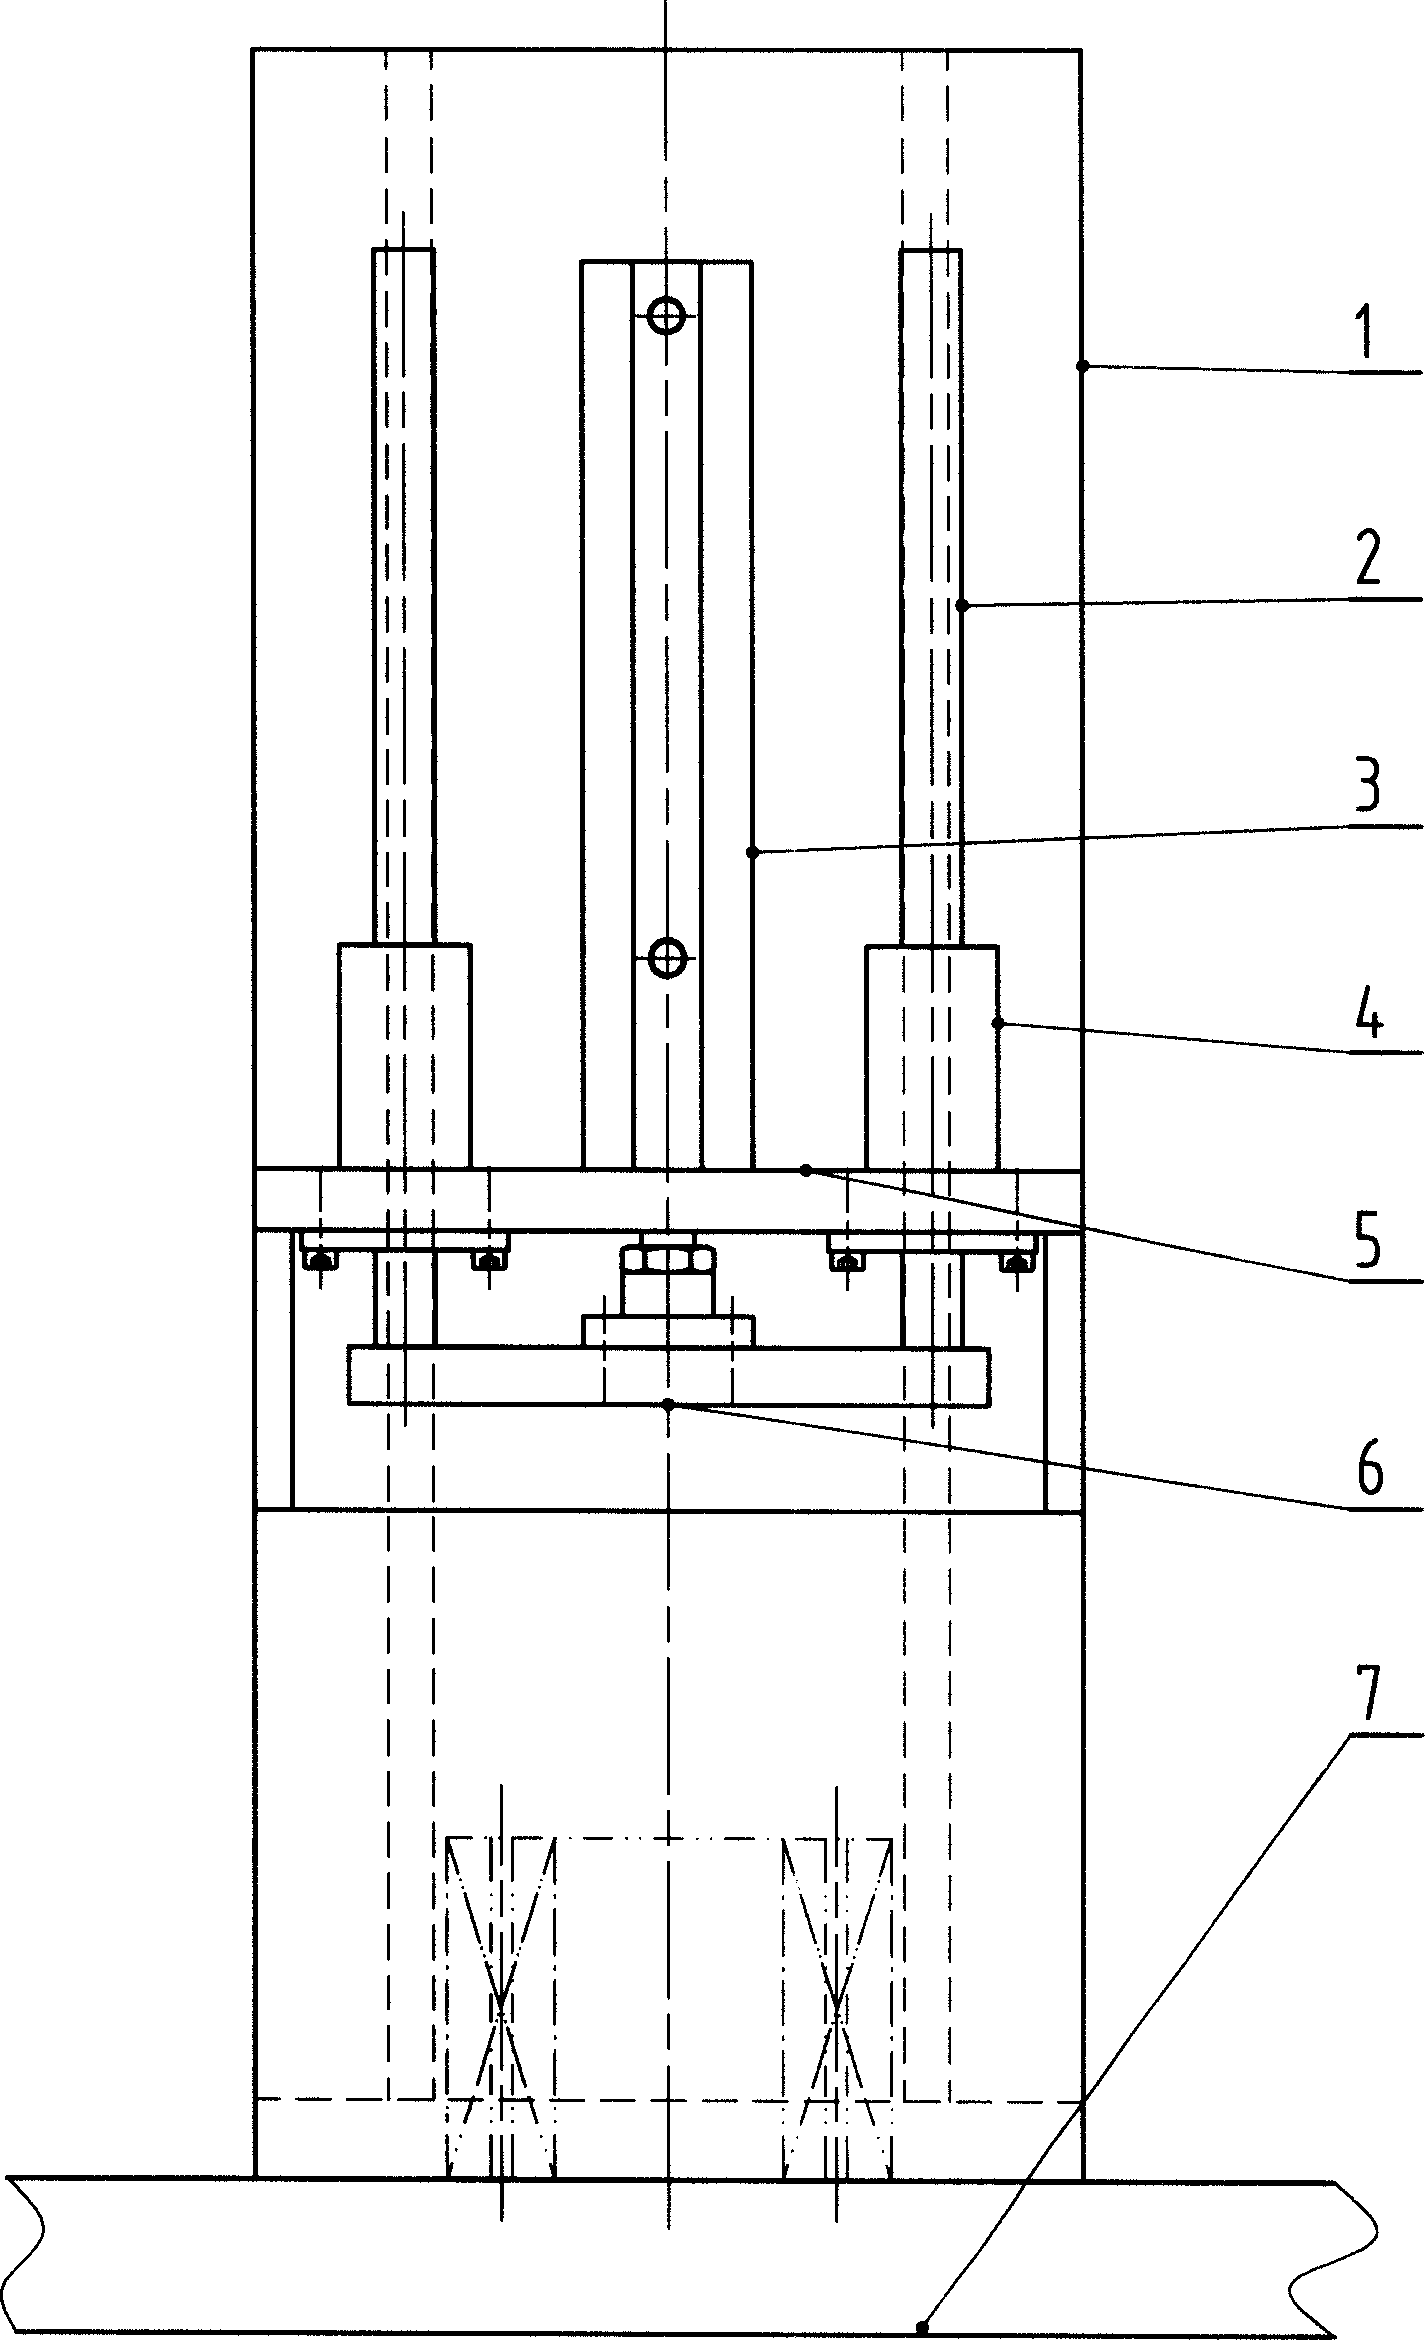 Stator stack thickness detector